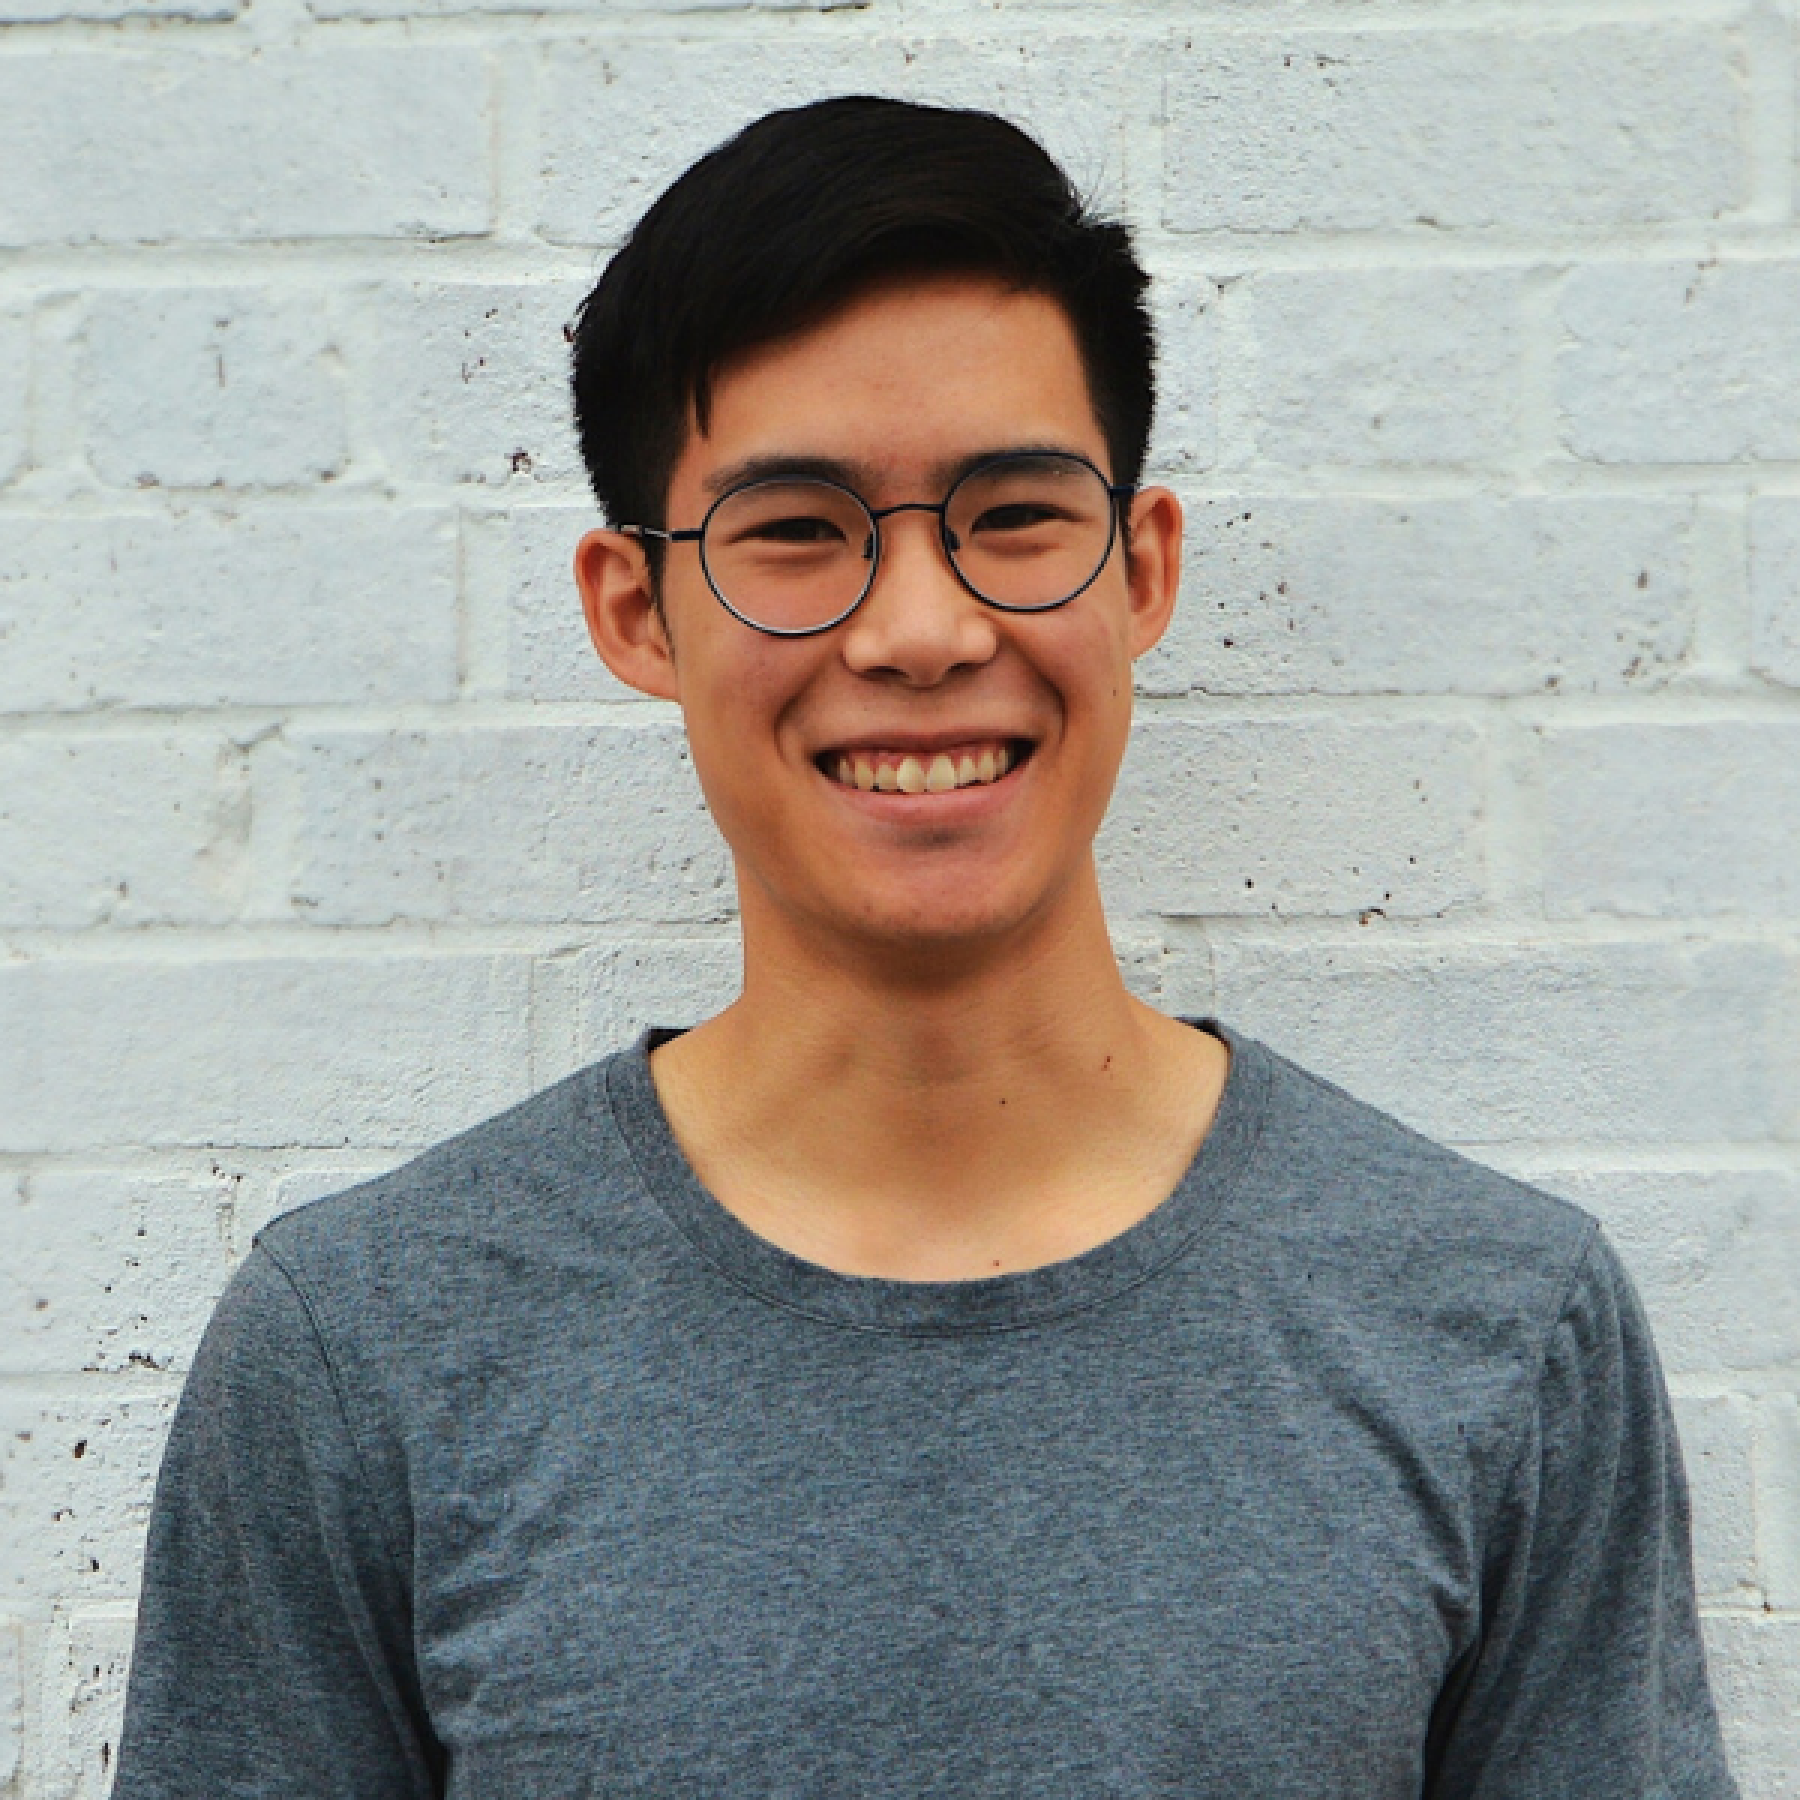 An image of Phil Wong, an alumnus and creator of a food startup, wearing a gray T-shirt and glasses.